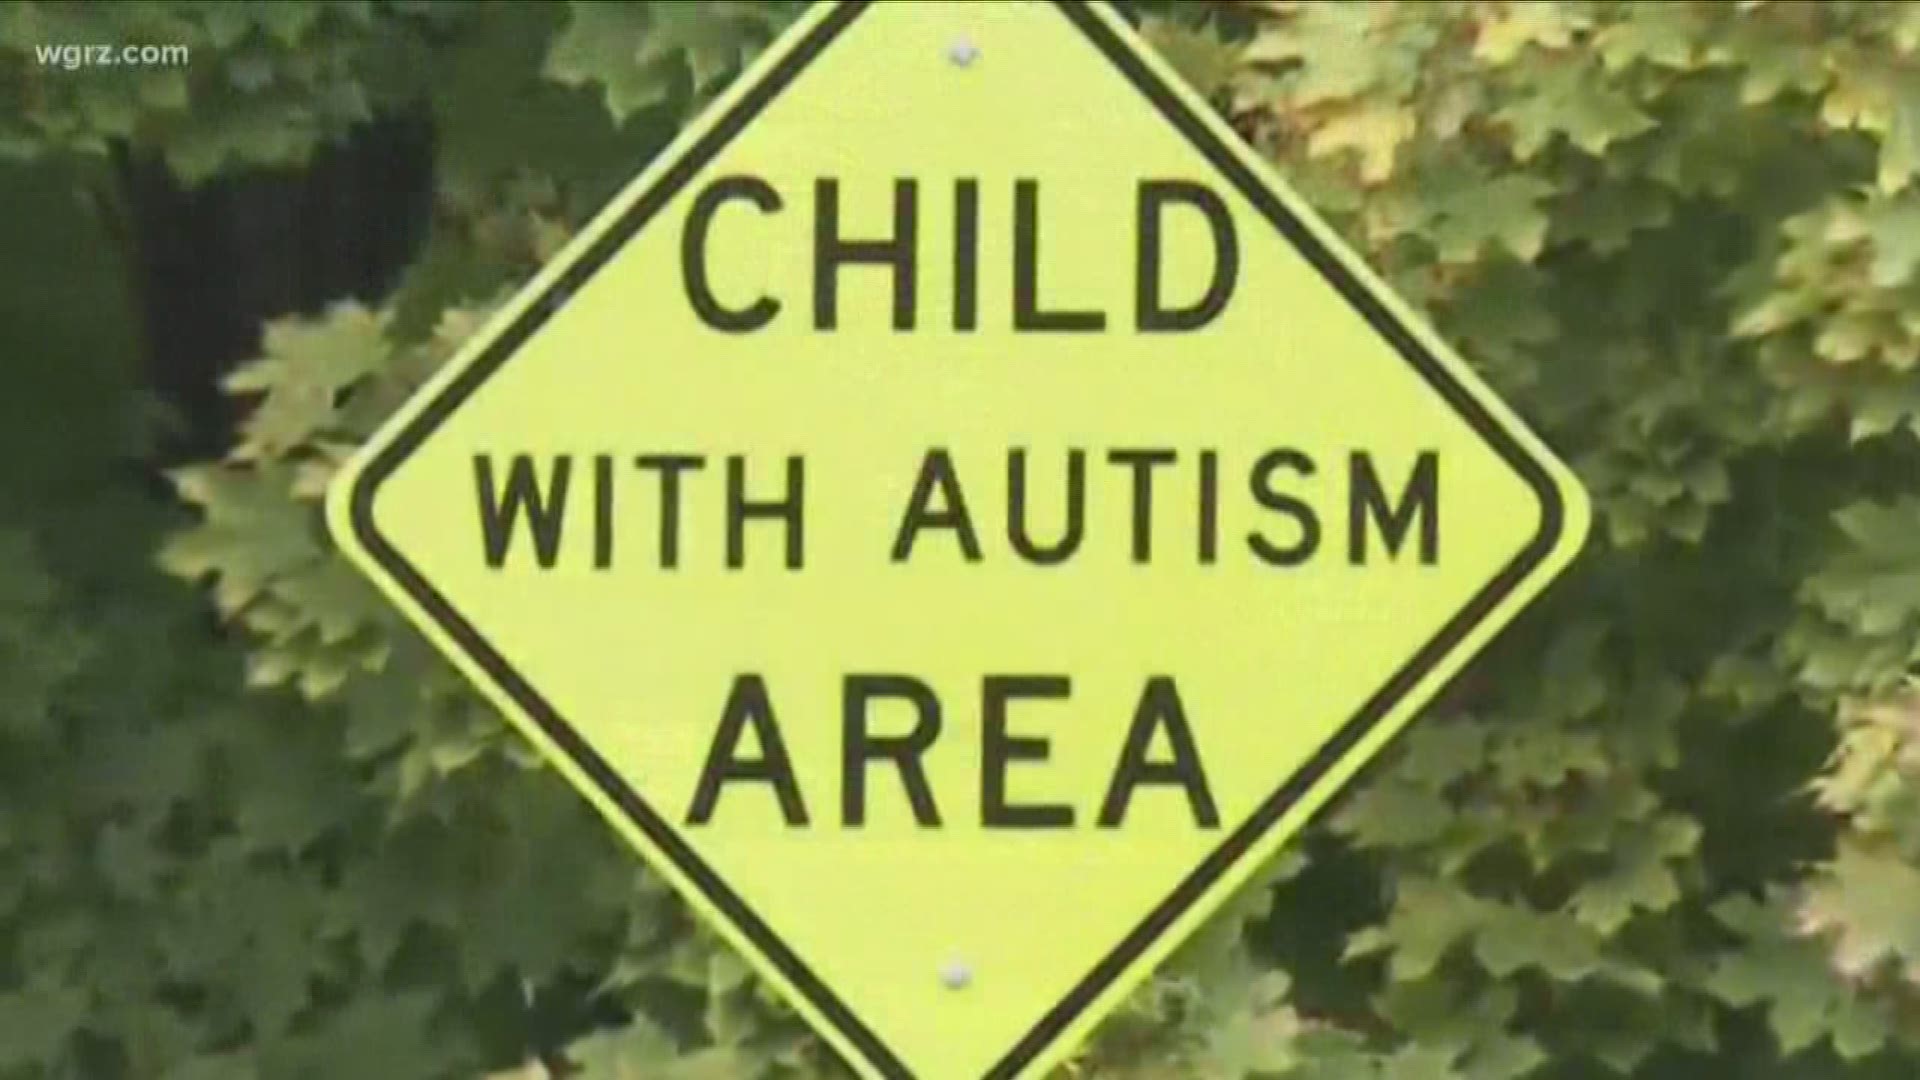 A Lancaster mother 2 On Your Side reported on in July will be getting the sign she requested several months ago, thanks to help from community leaders.